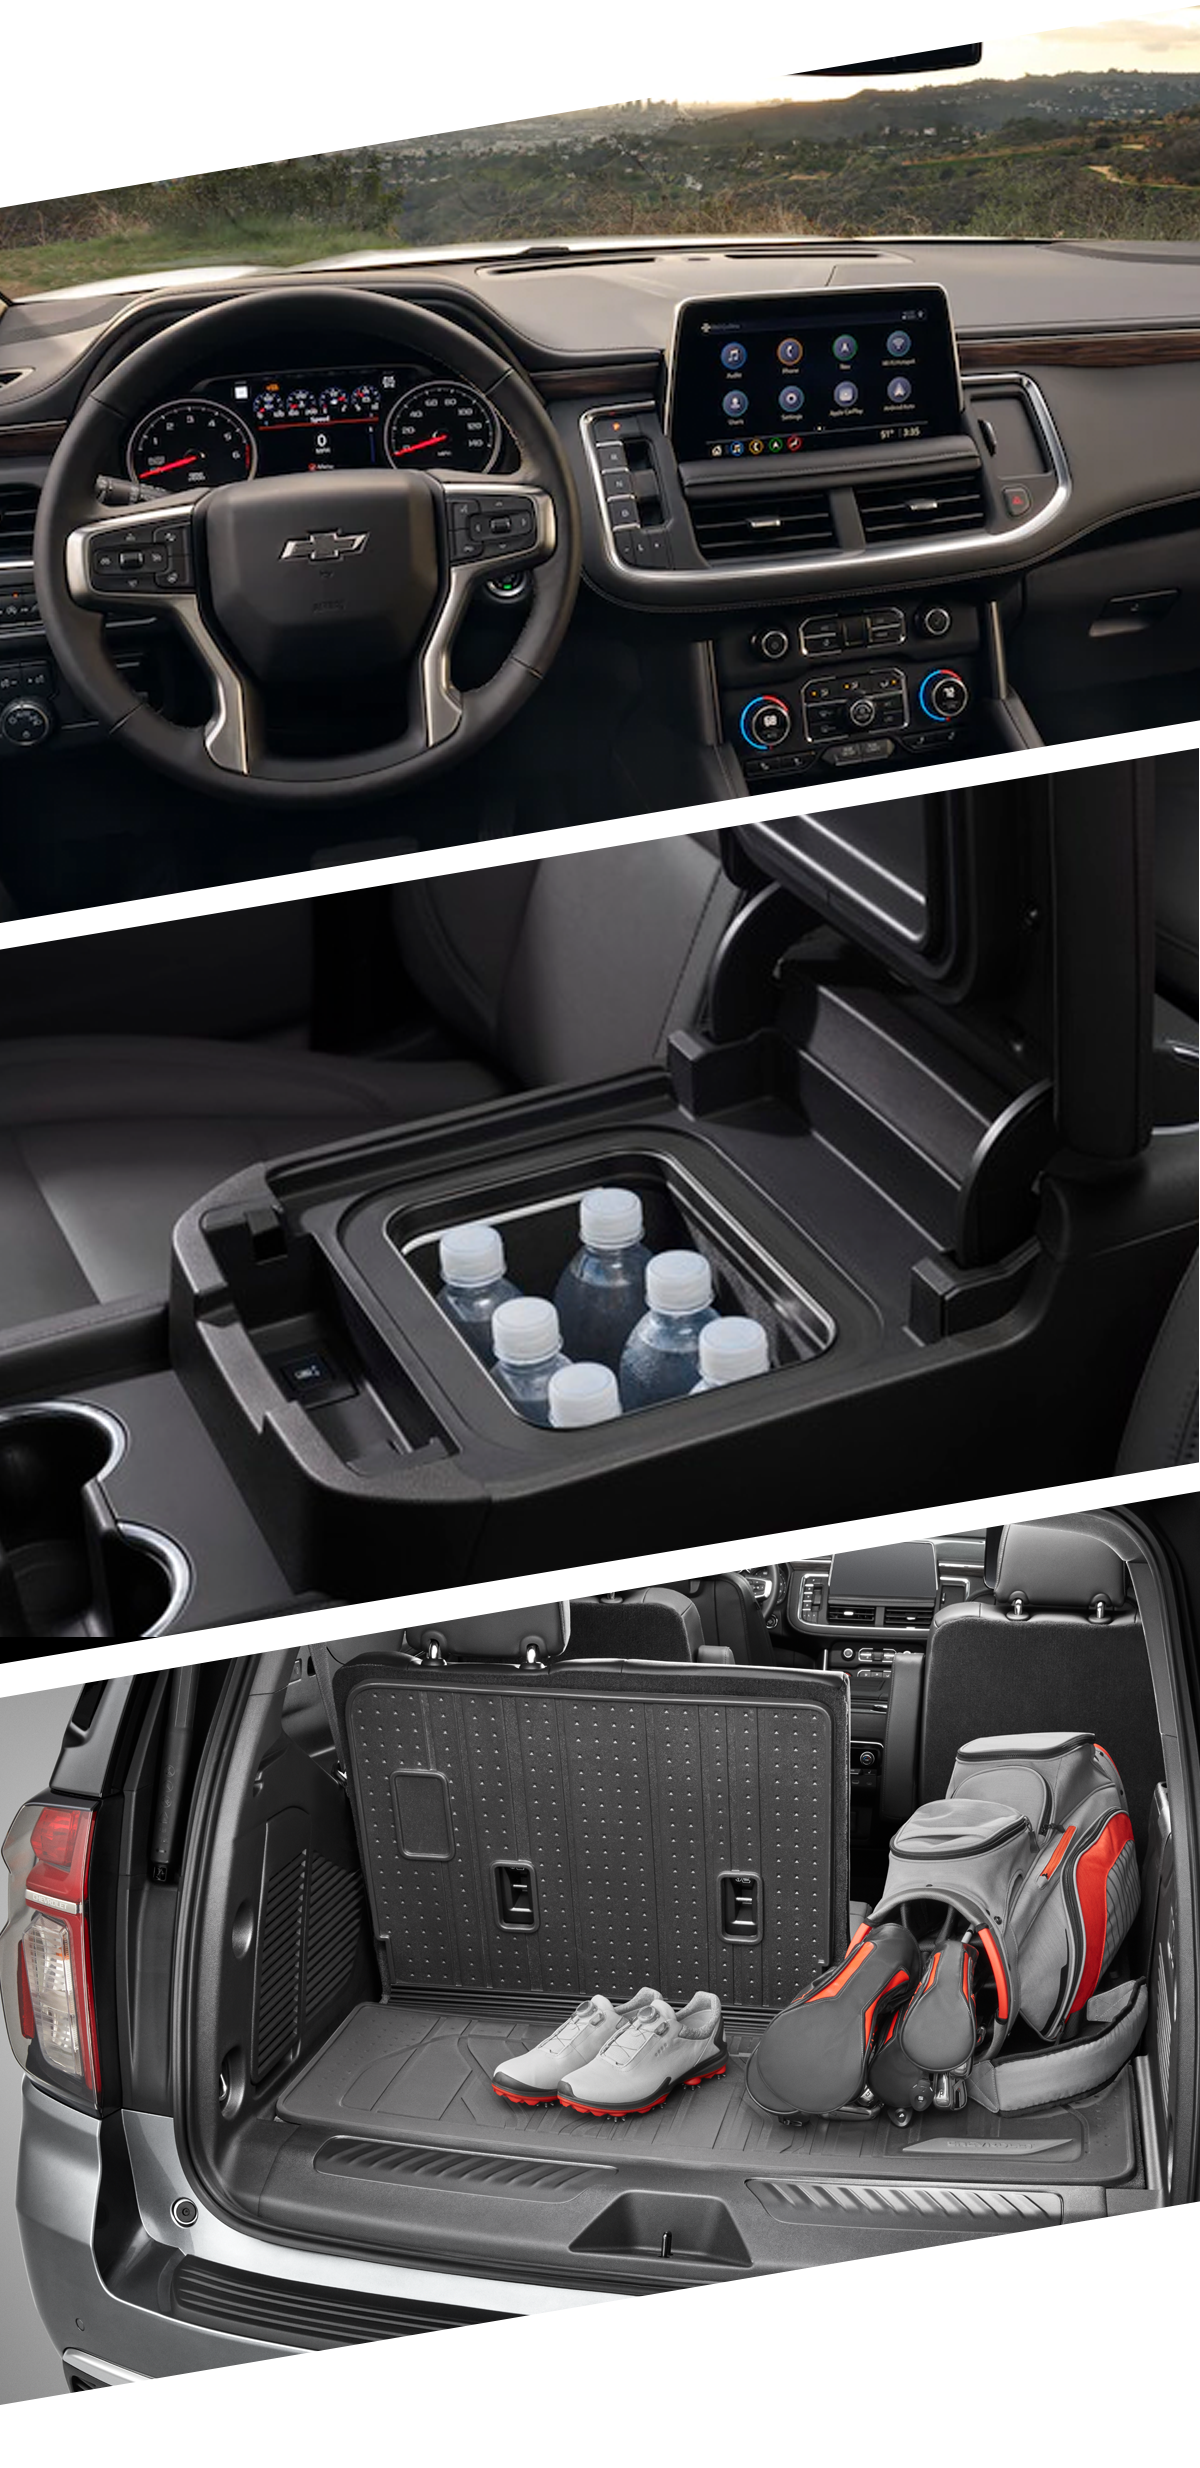 2021 Chevy Tahoe Interior Cluster Image